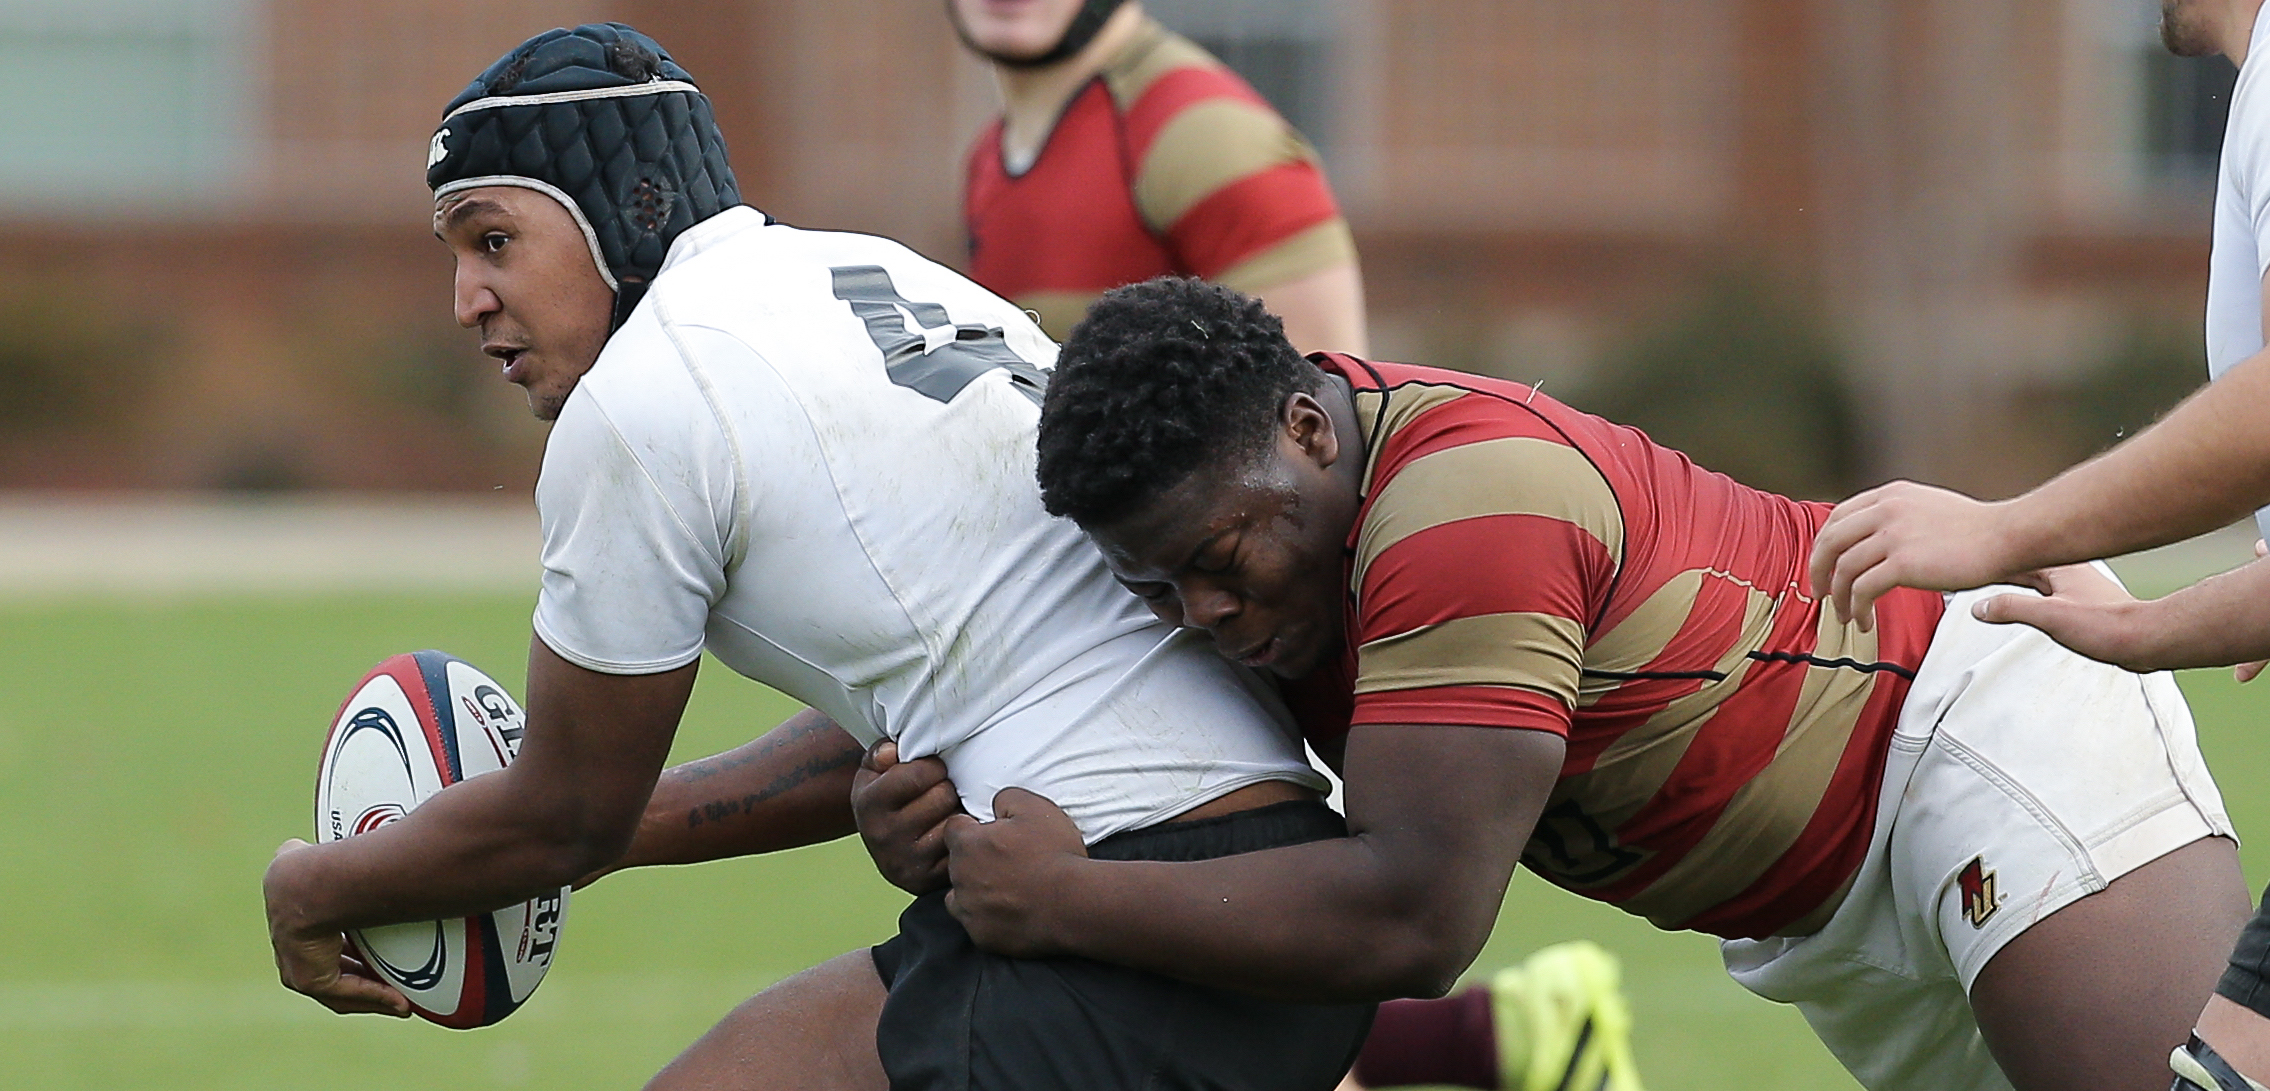 Keyon McCloud-Holman of Norwich tackles Zachary Smith of Wisconsin-Whitewater in the semifinals of the 2016 national DII college rugby championship. Jeremy Fleming photo.